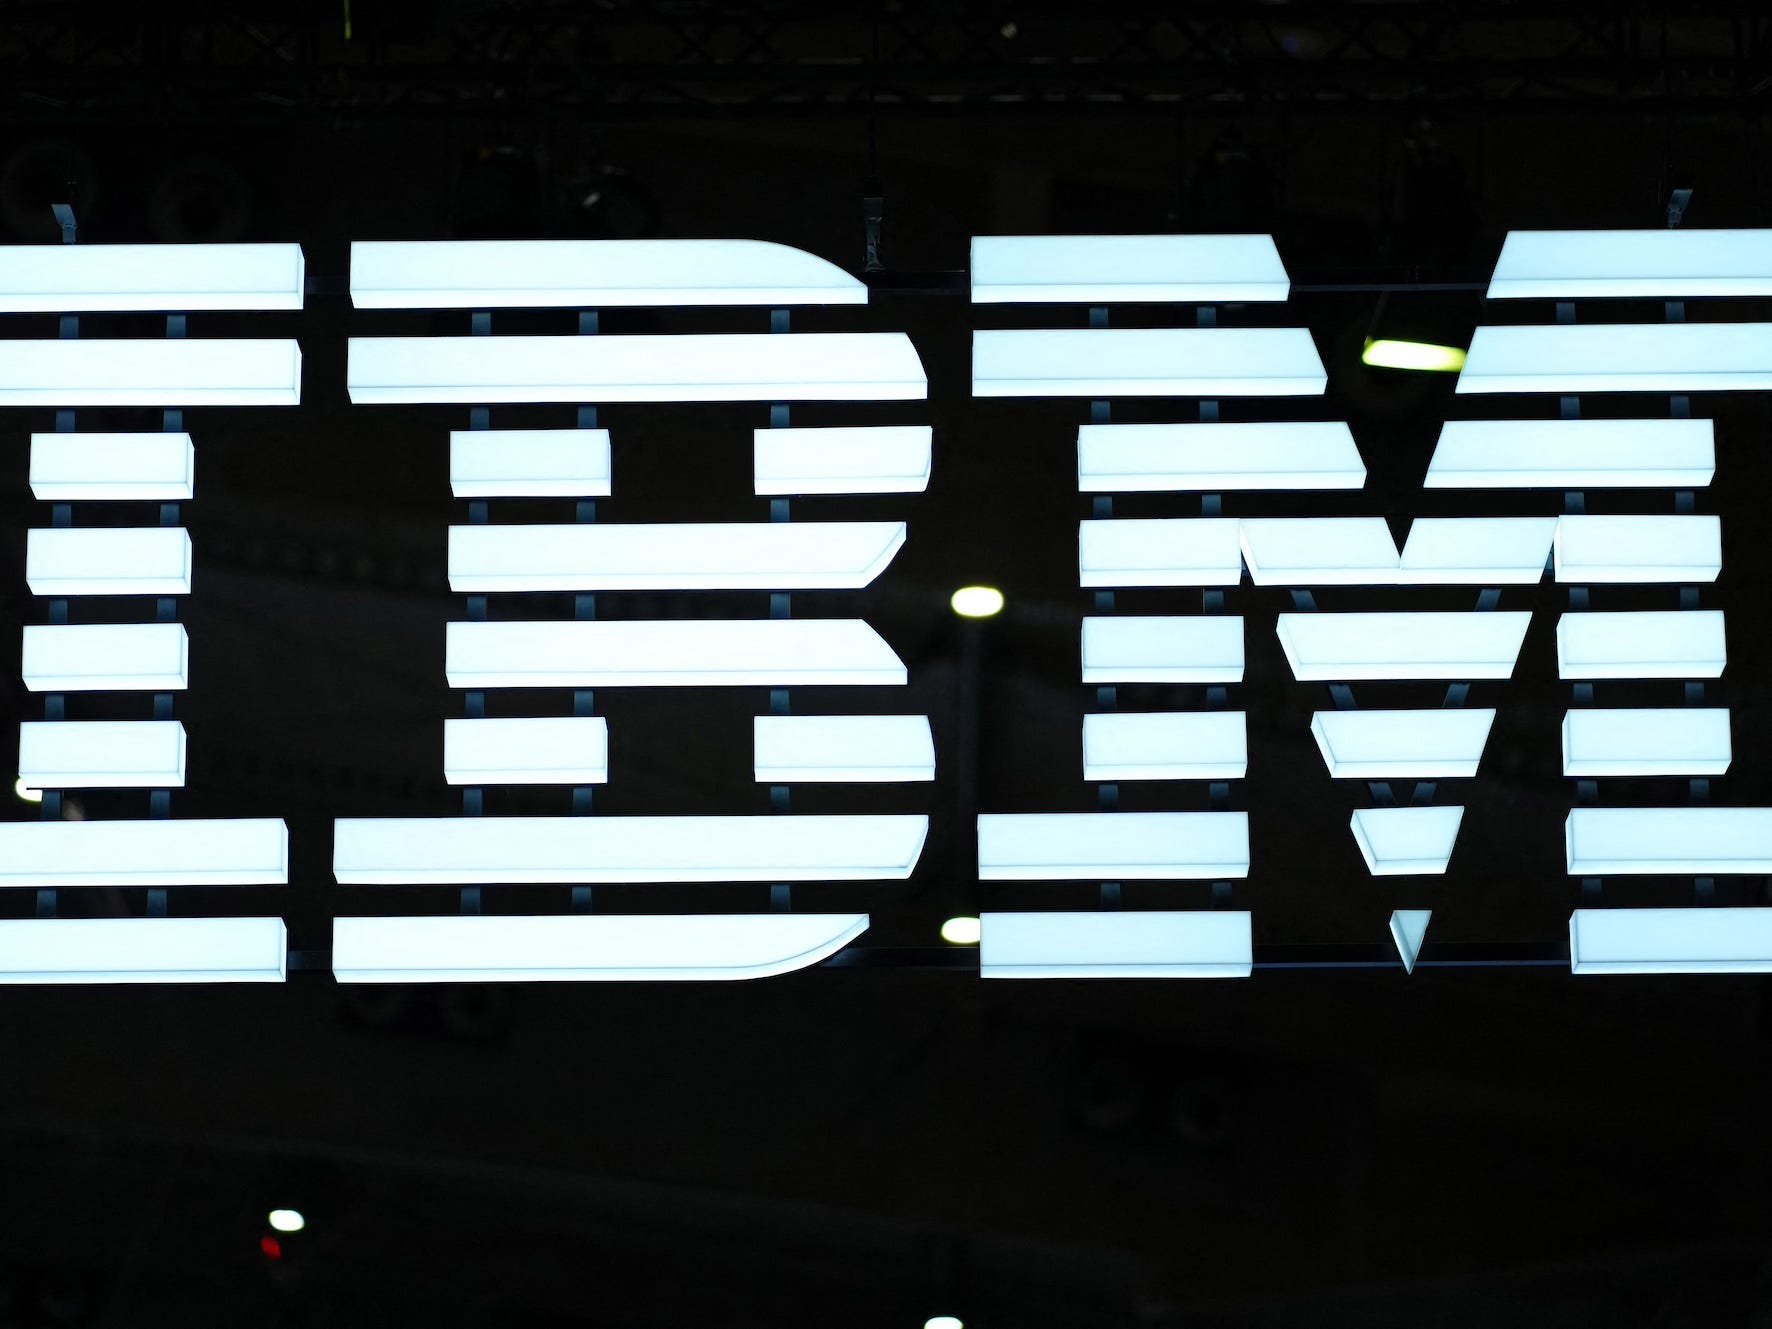 <p>Kelli Jordan, vice president of IBMer Growth and Development, told BI that several years ago, <a href="https://www.businessinsider.com/5-interview-tips-from-vp-talent-acquisition-ibm-career-strategy-2022-8">IBM</a> "started to be a lot more thoughtful about really changing the requirements for our jobs and removing those college degree requirements from a lot of our roles."</p><p>"At this point, more than half of our US job openings don't have a bachelor's degree requirement, and we really start to think more strategically about the types of skills that are needed for different types of roles," Jordan said. "This is applied to all of the types of jobs across the spectrum of IBM, whether it's cloud computing or AI or cybersecurity or design."</p><p><a href="https://www.ibm.com/impact/feature/apprenticeship">Apprenticeships</a> can be one opportunity for job seekers without a degree. Jordan said over 90% of IBM's apprentice graduates ended up being full-time workers at the company.</p><p>"Our US apprenticeship program is really a different entry point into IBM for talent that may have been previously overlooked or excluded from consideration," Jordan said.</p><p>People skills, like collaboration and communication, are desirable at the company per Jordan.</p><p>"Even as over time we may have to update the technical skills required for a role, all of the jobs at IBM are really going to lean into those types of people skills or power skills as part of what we're looking for when we're hiring a candidate," Jordan said.</p>